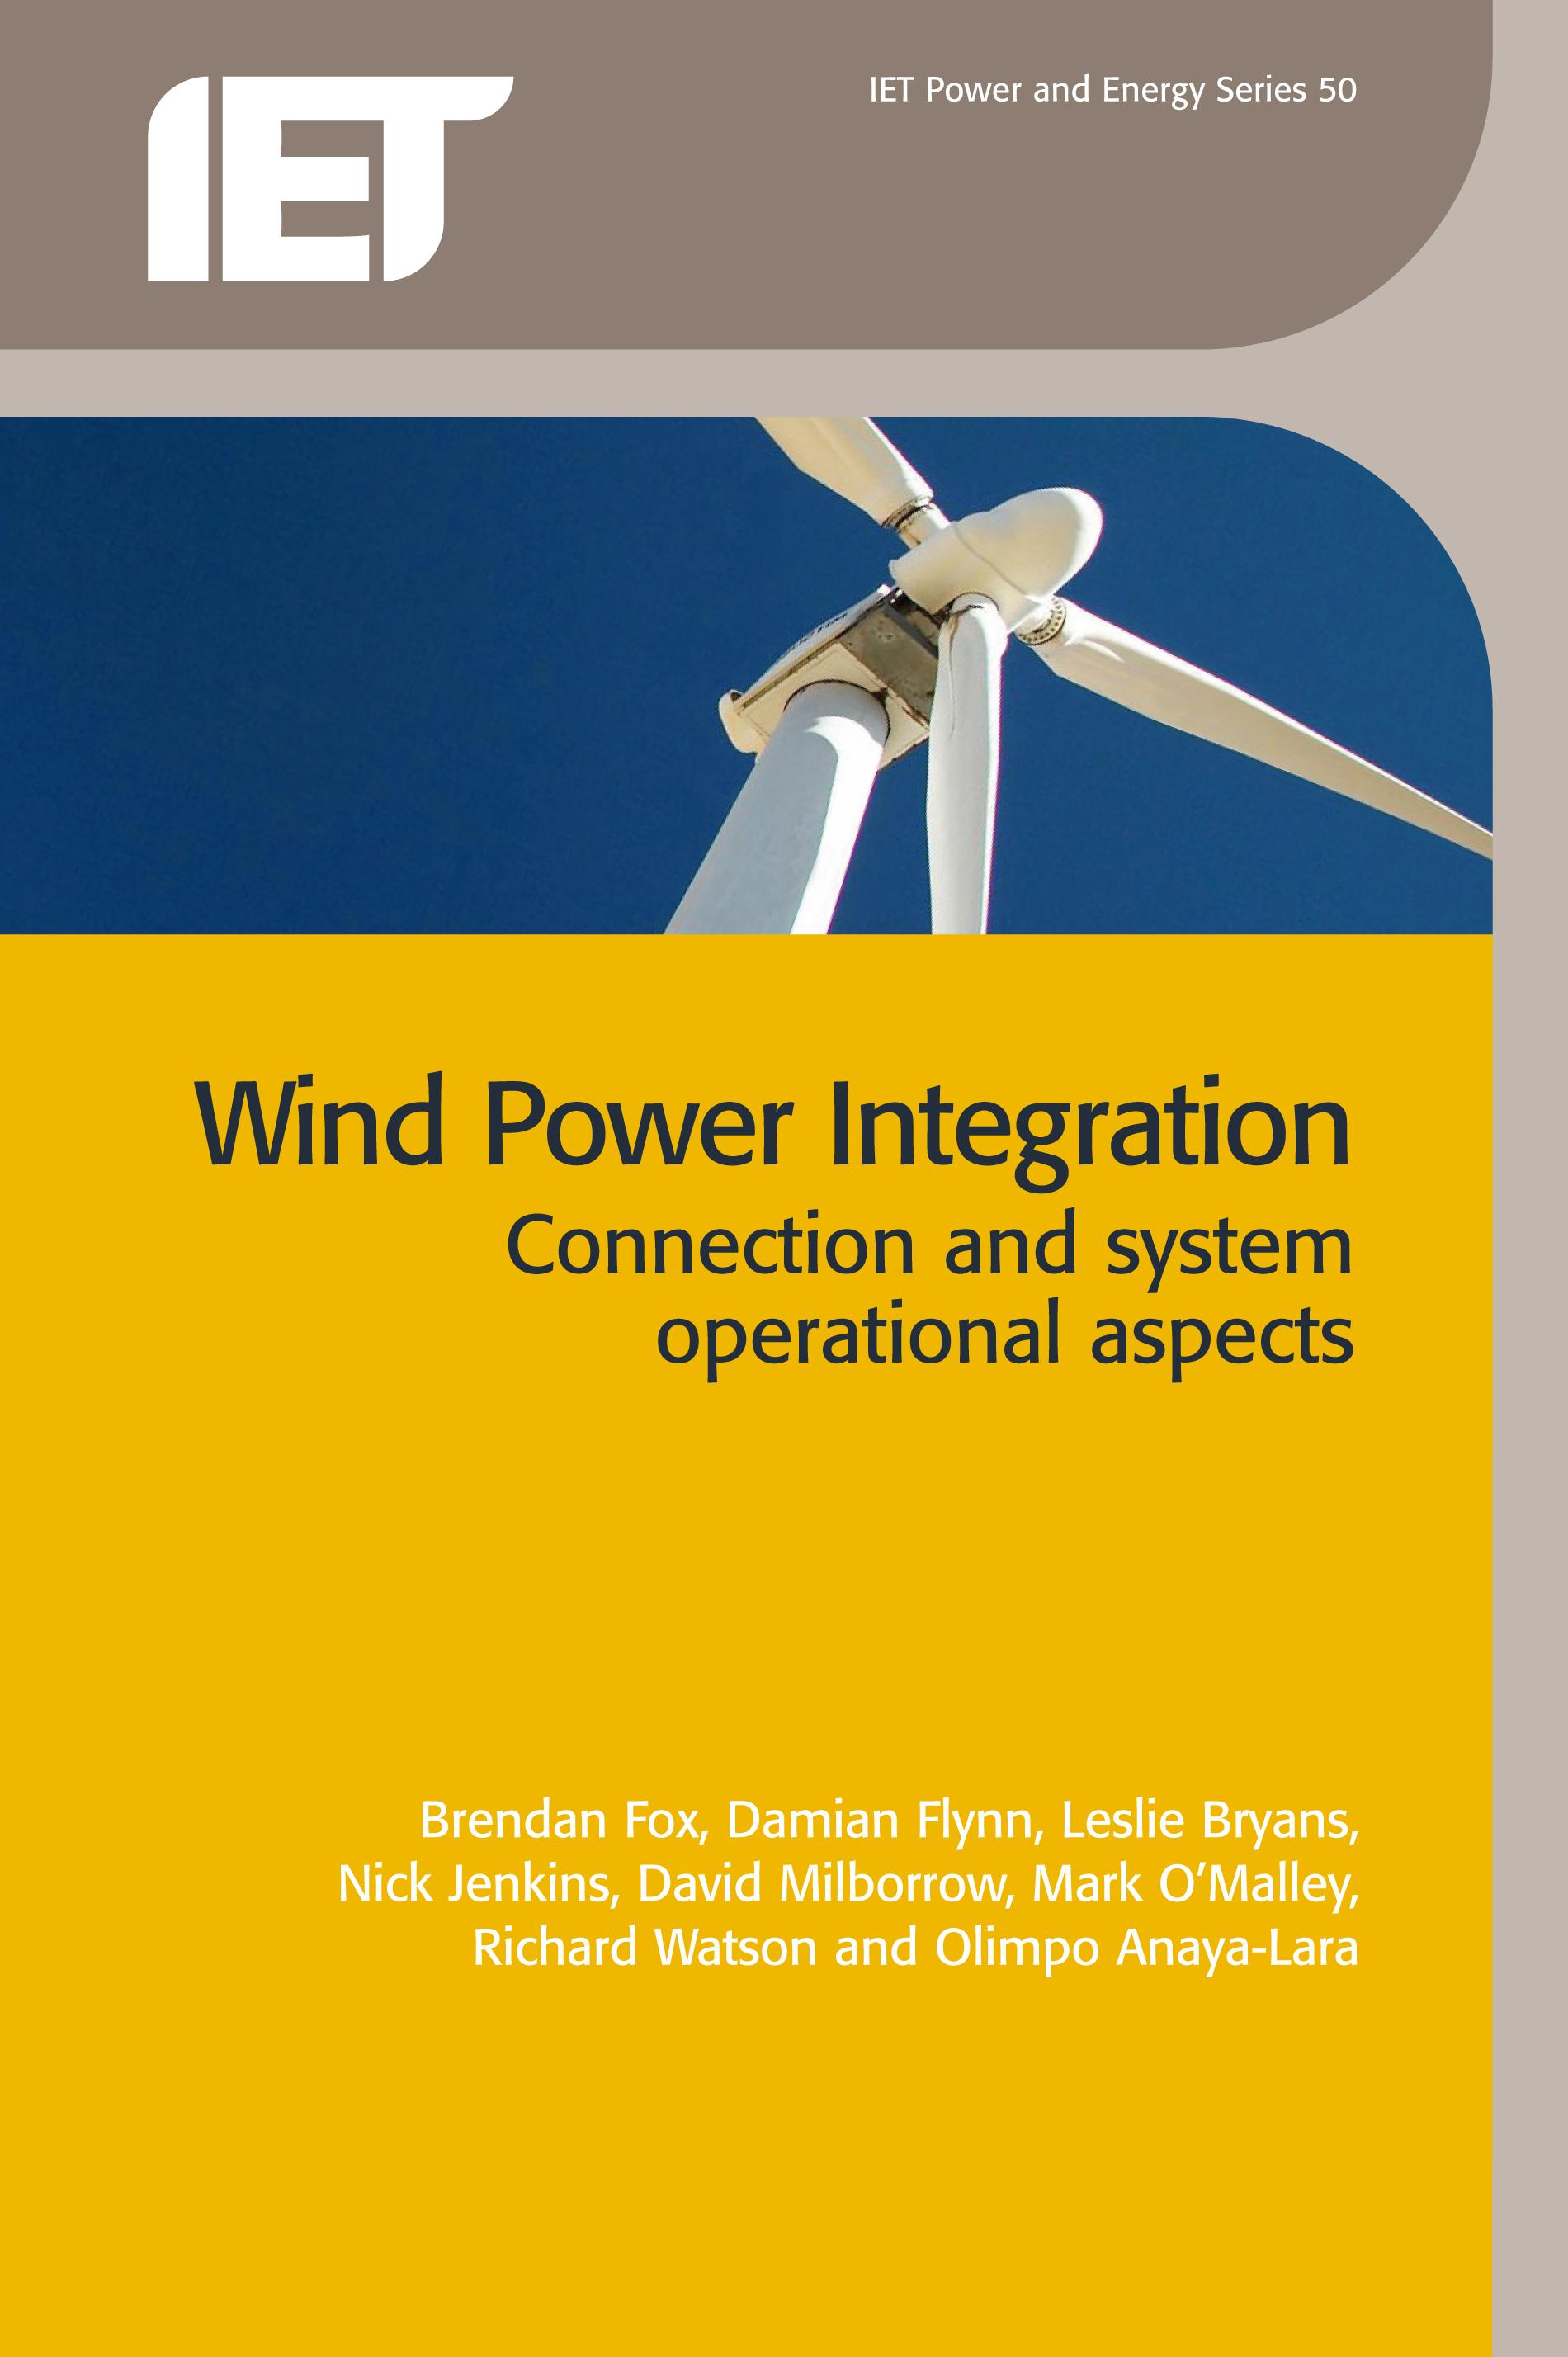 Wind Power Integration, Connection and system operational aspects